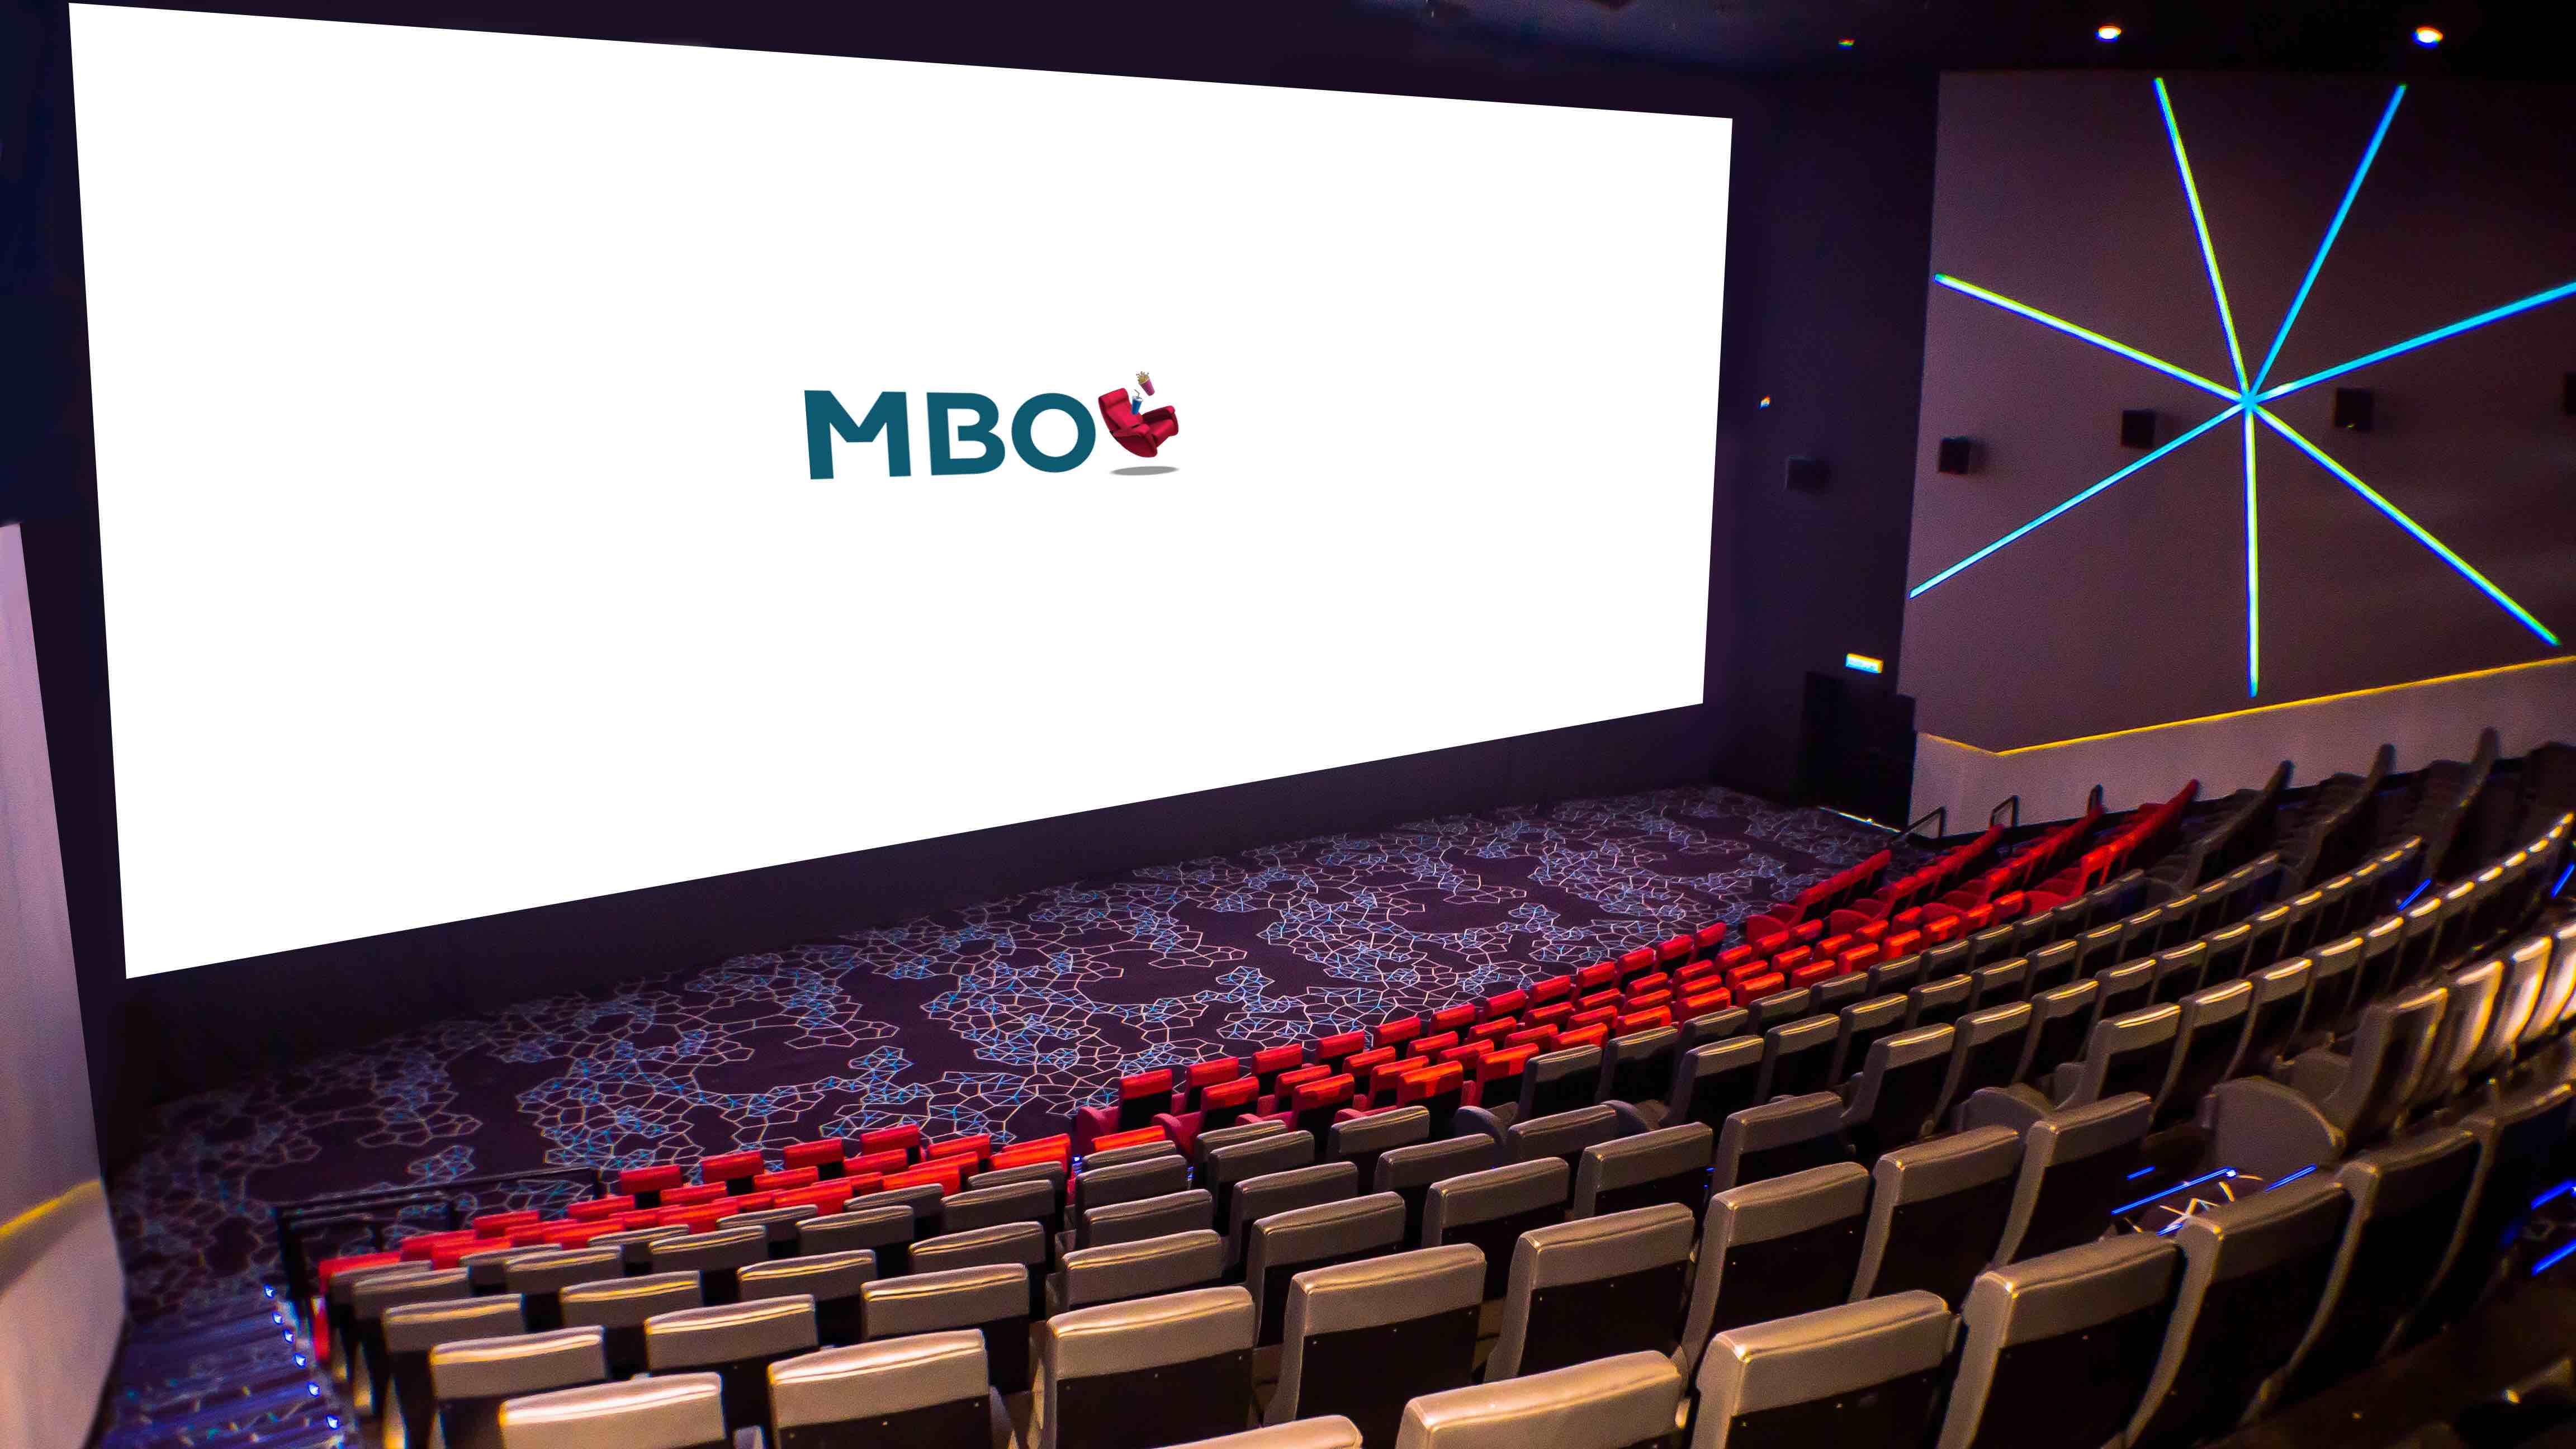 mbo-cinemas-just-set-up-the-largest-screen-in-the-east-coast